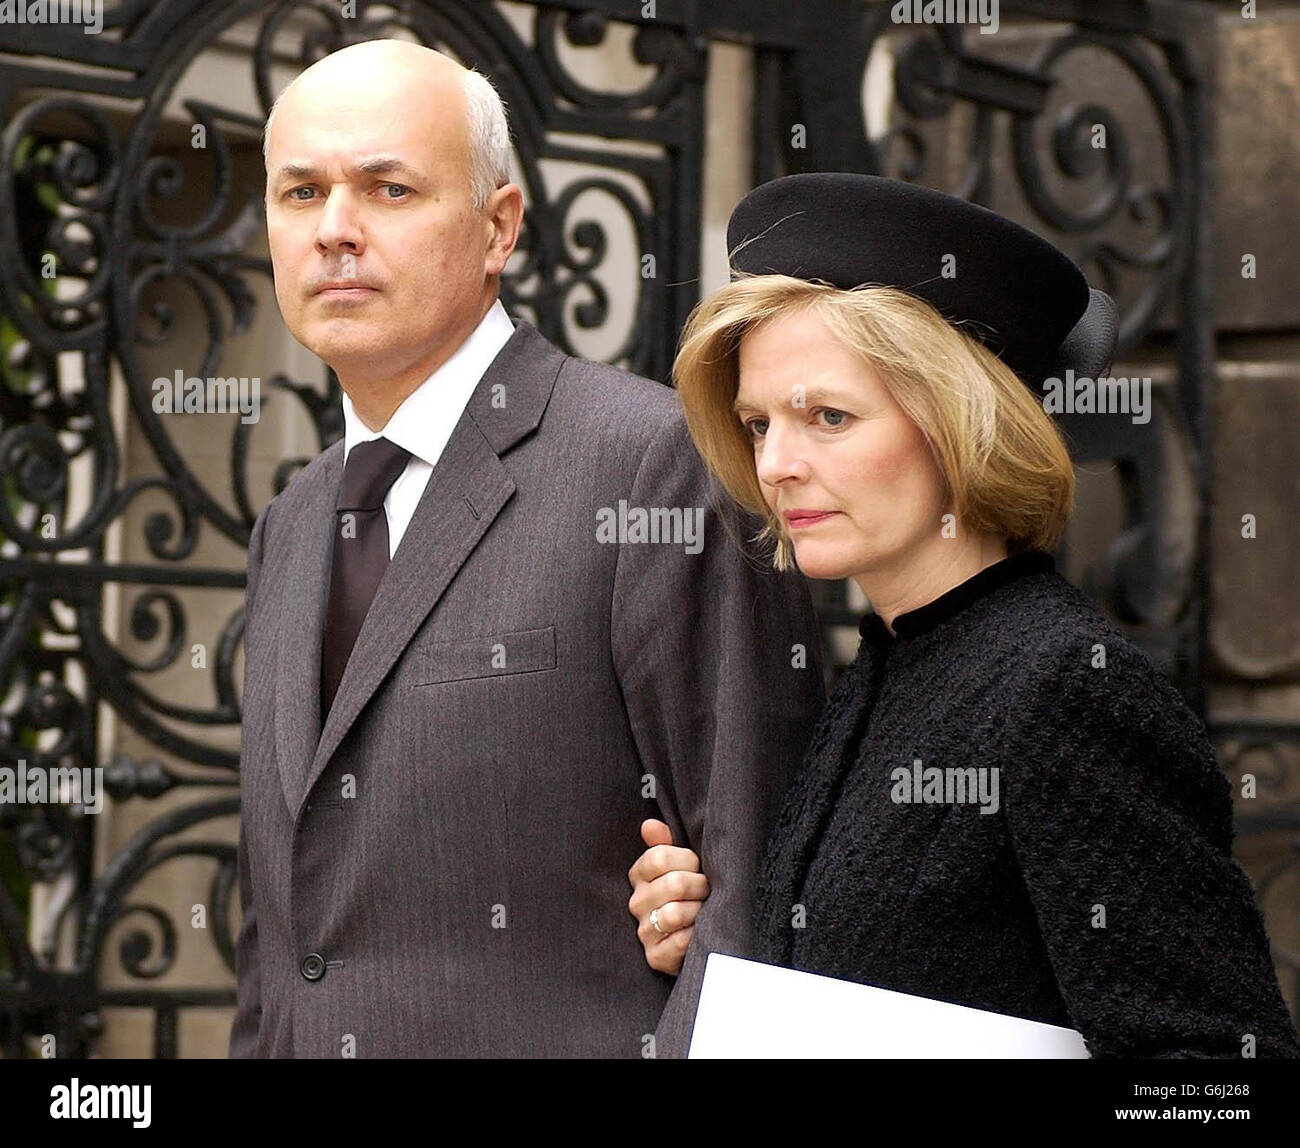 Tory leader Iain Duncan Smith and his wife Betsy leave the service of remembrance, at St Pauls Catherdral, central London, in honour of those who died in the Iraq war. The service is being addressed by the Archbishop of Canterbury, Dr Rowan Williams. There will also to be a minute's silence, led by Bishop to the Forces the Rt Rev David Conner, with a bugler sounding the Last Post. Stock Photo